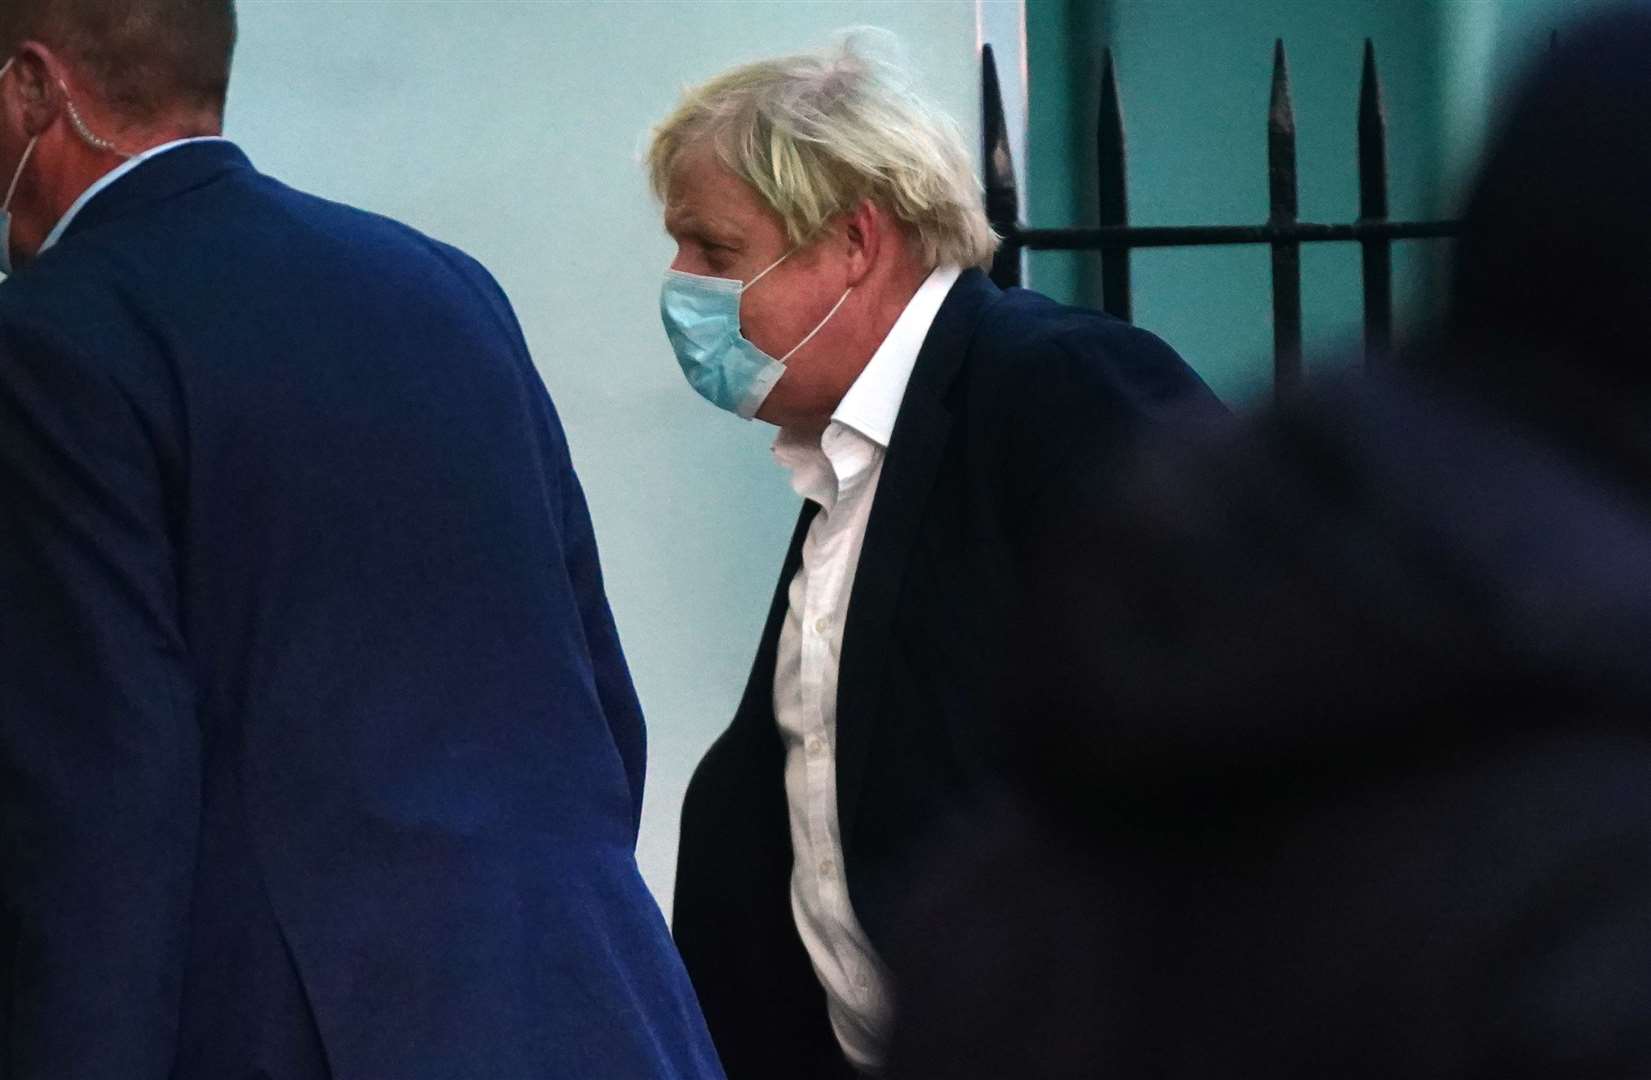 Prime Minister Boris Johnson arriving at a central London hospital where his wife Carrie gave birth to her second child. (Victoria Jones/PA)